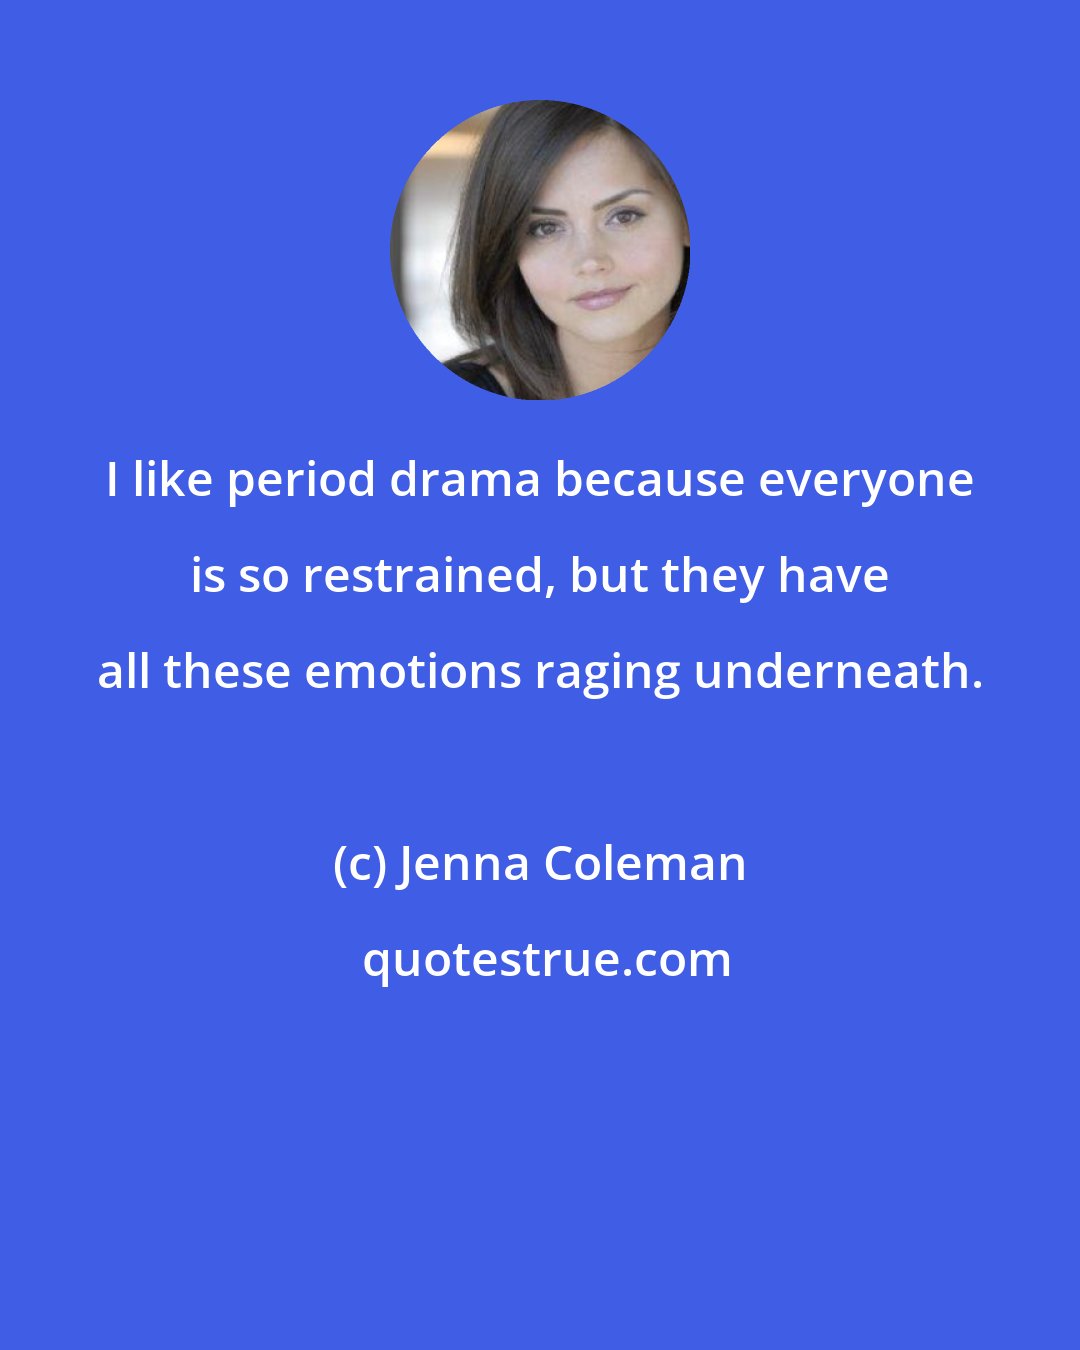 Jenna Coleman: I like period drama because everyone is so restrained, but they have all these emotions raging underneath.